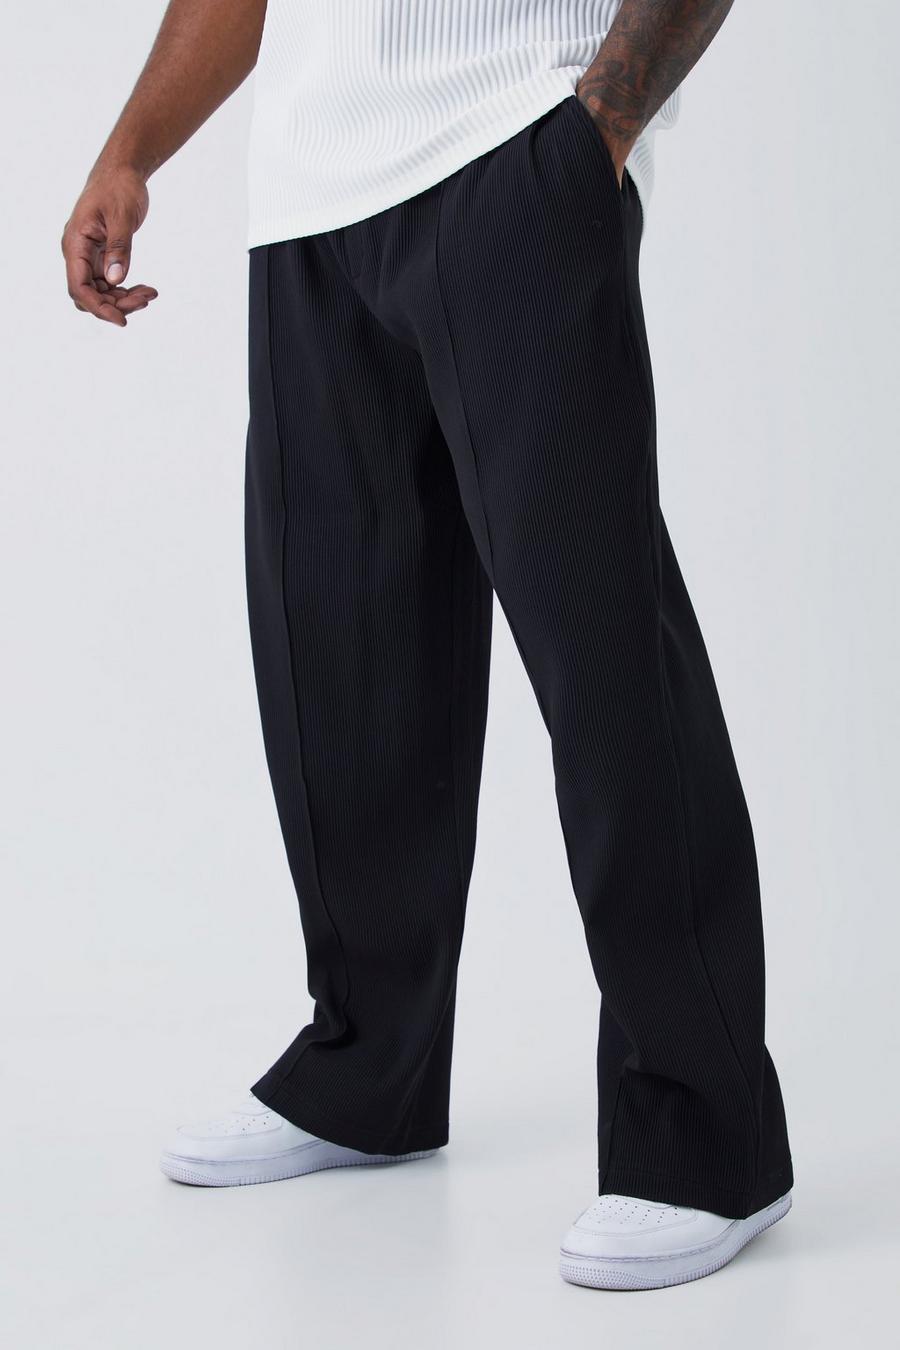 Black Plus Elastic Waist Relaxed Fit Pleated Trouser